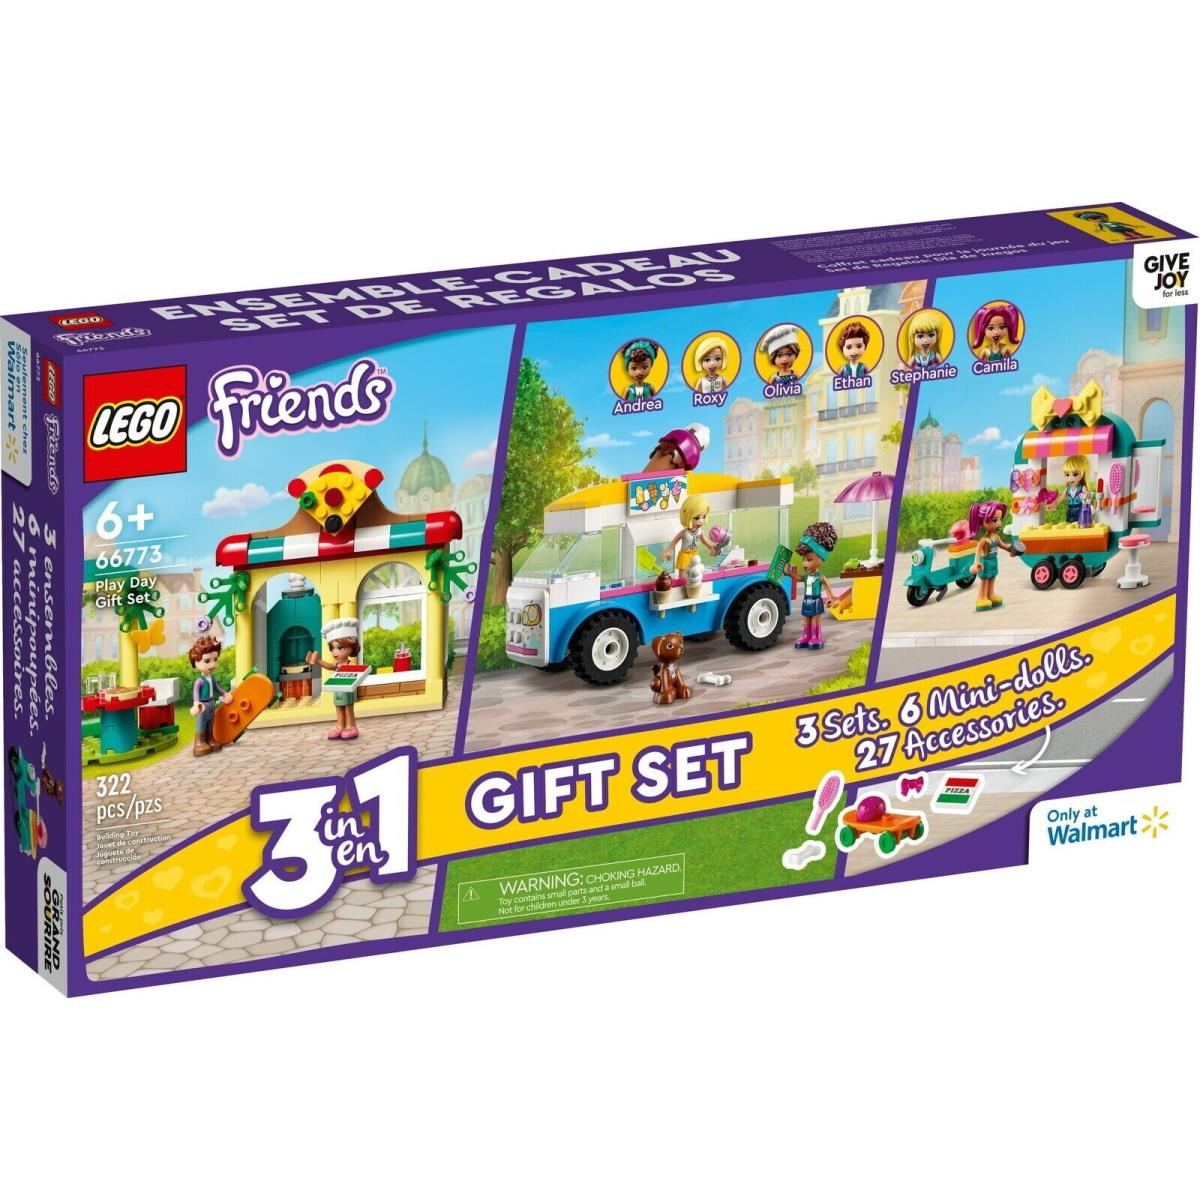 Lego Friends Play Day Gift Set 66773 3 in 1 Building Toy Set For 6 Year Old